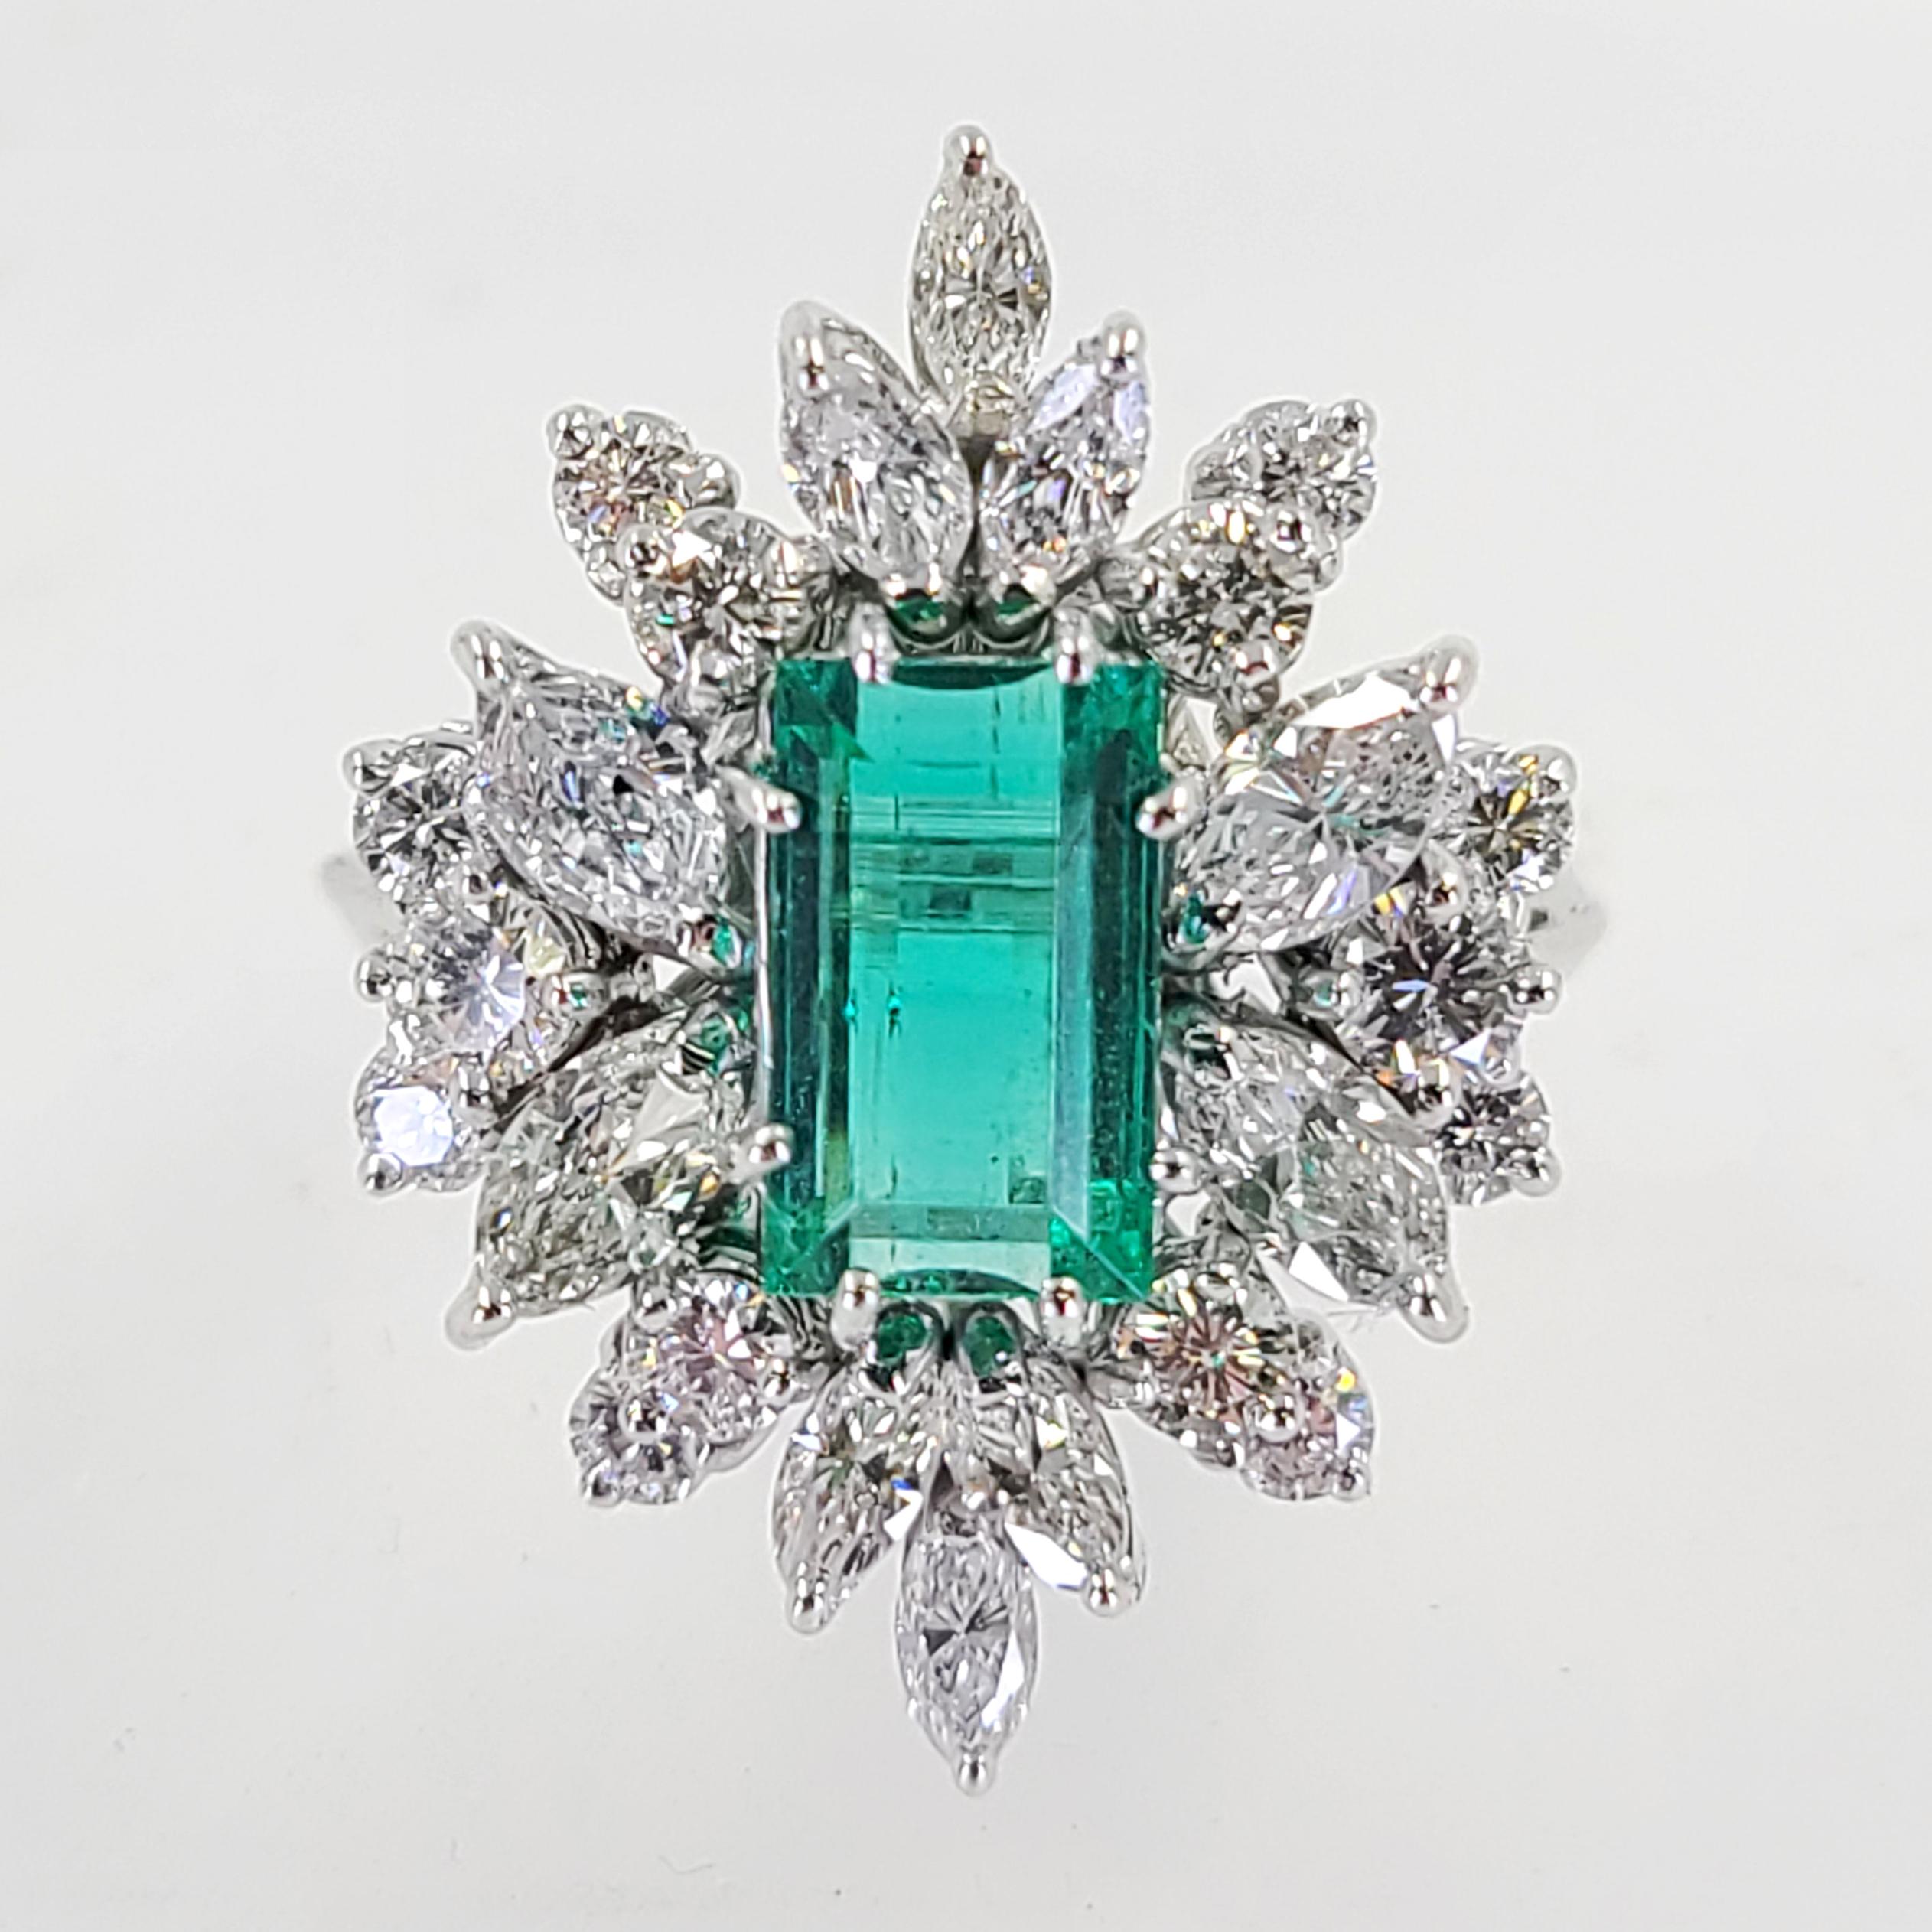 18 Karat White Gold Ring Featuring A 1.70 Carat Rectangular Cut Emerald Surrounded By 24 Marquise & Round Brilliant Cut Diamonds Of VS Clarity & G/H Color Totaling An Additional 2.00 Carats, Finger Size 6.25; Purchase Includes One Sizing Service